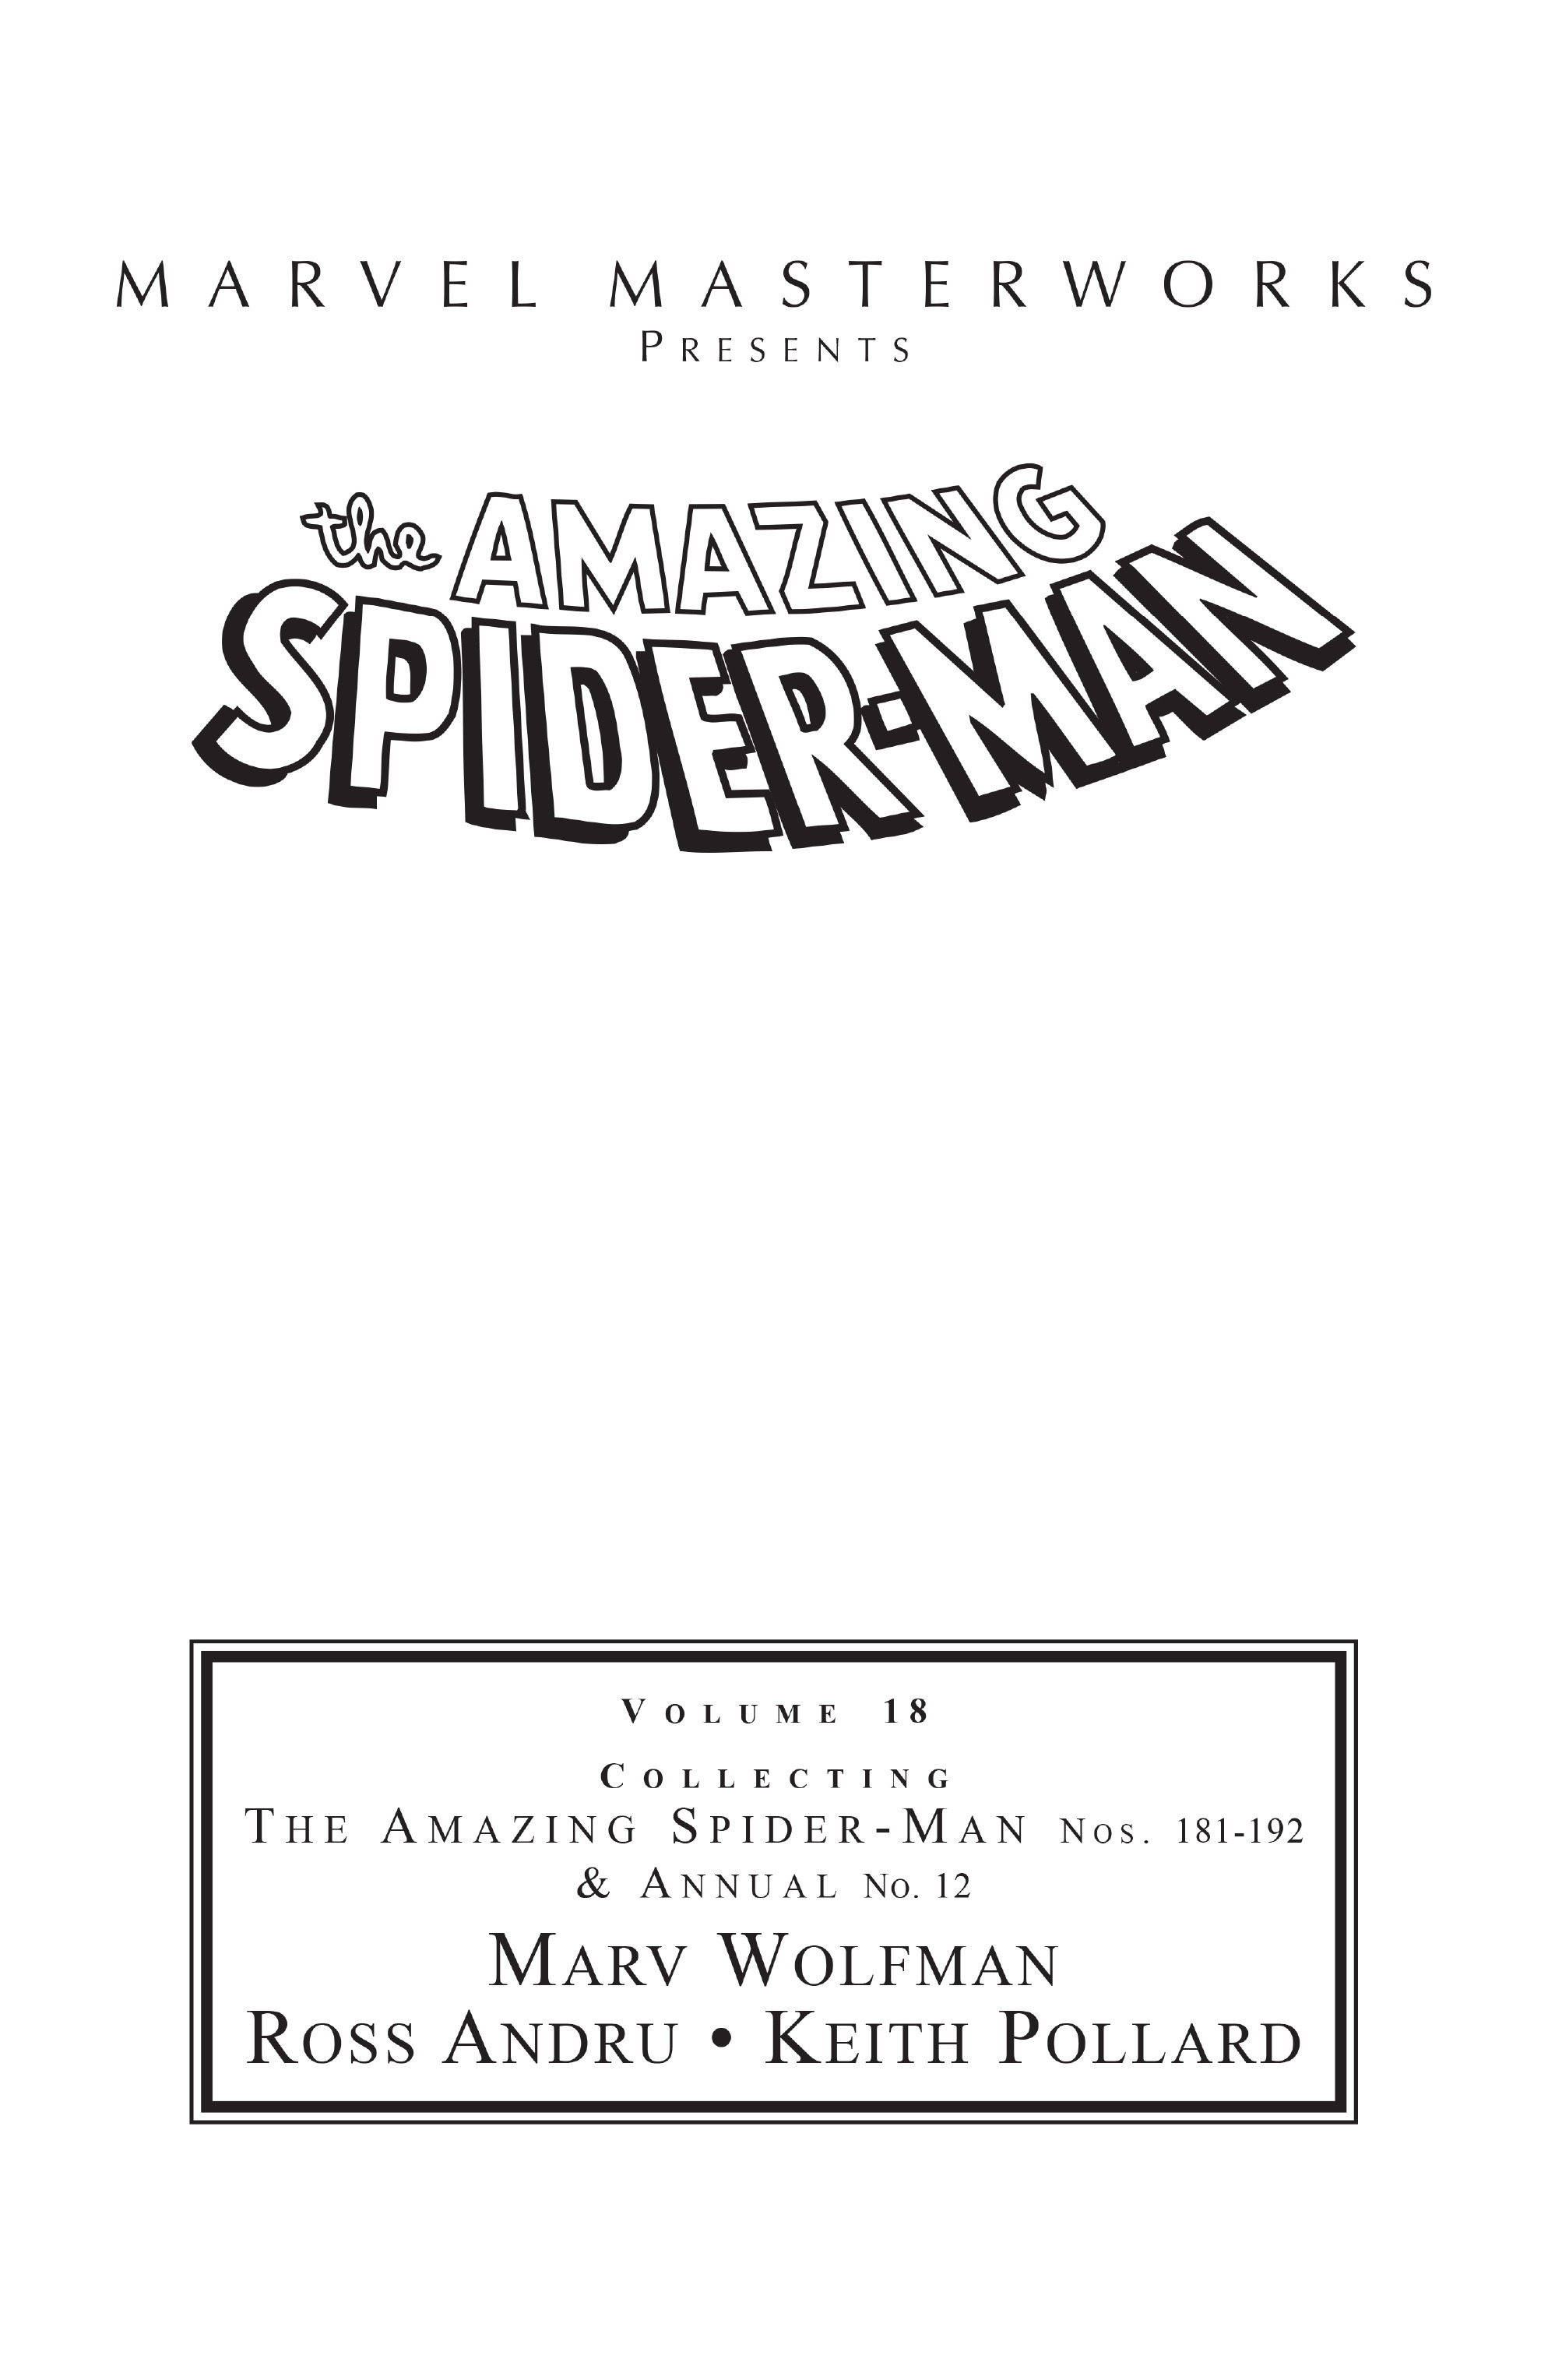 Read online Marvel Masterworks: The Amazing Spider-Man comic -  Issue # TPB 18 (Part 1) - 2